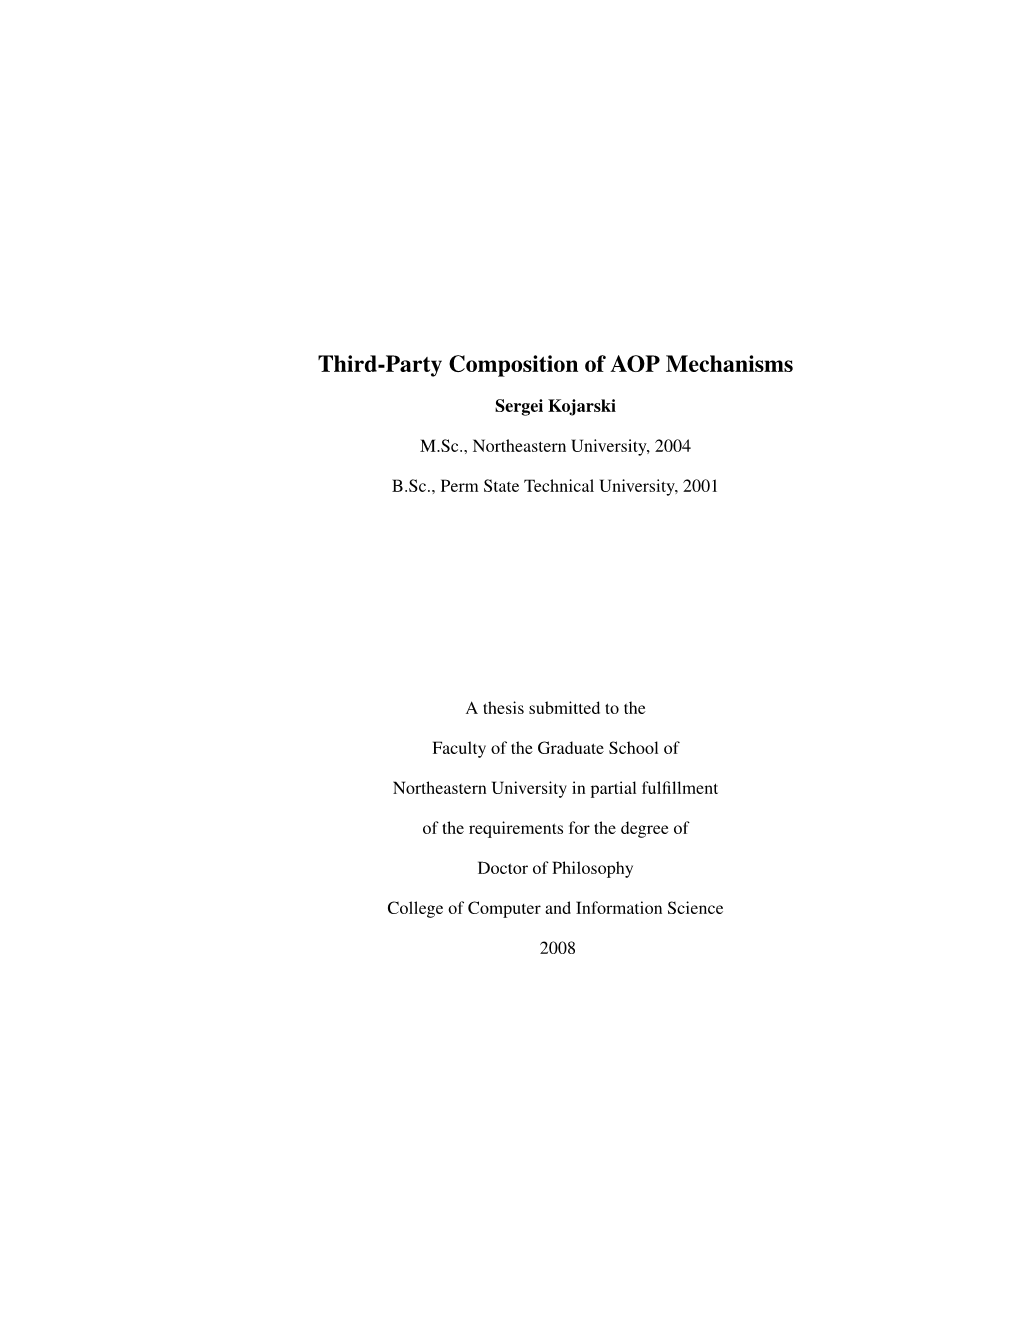 Third-Party Composition of AOP Mechanisms